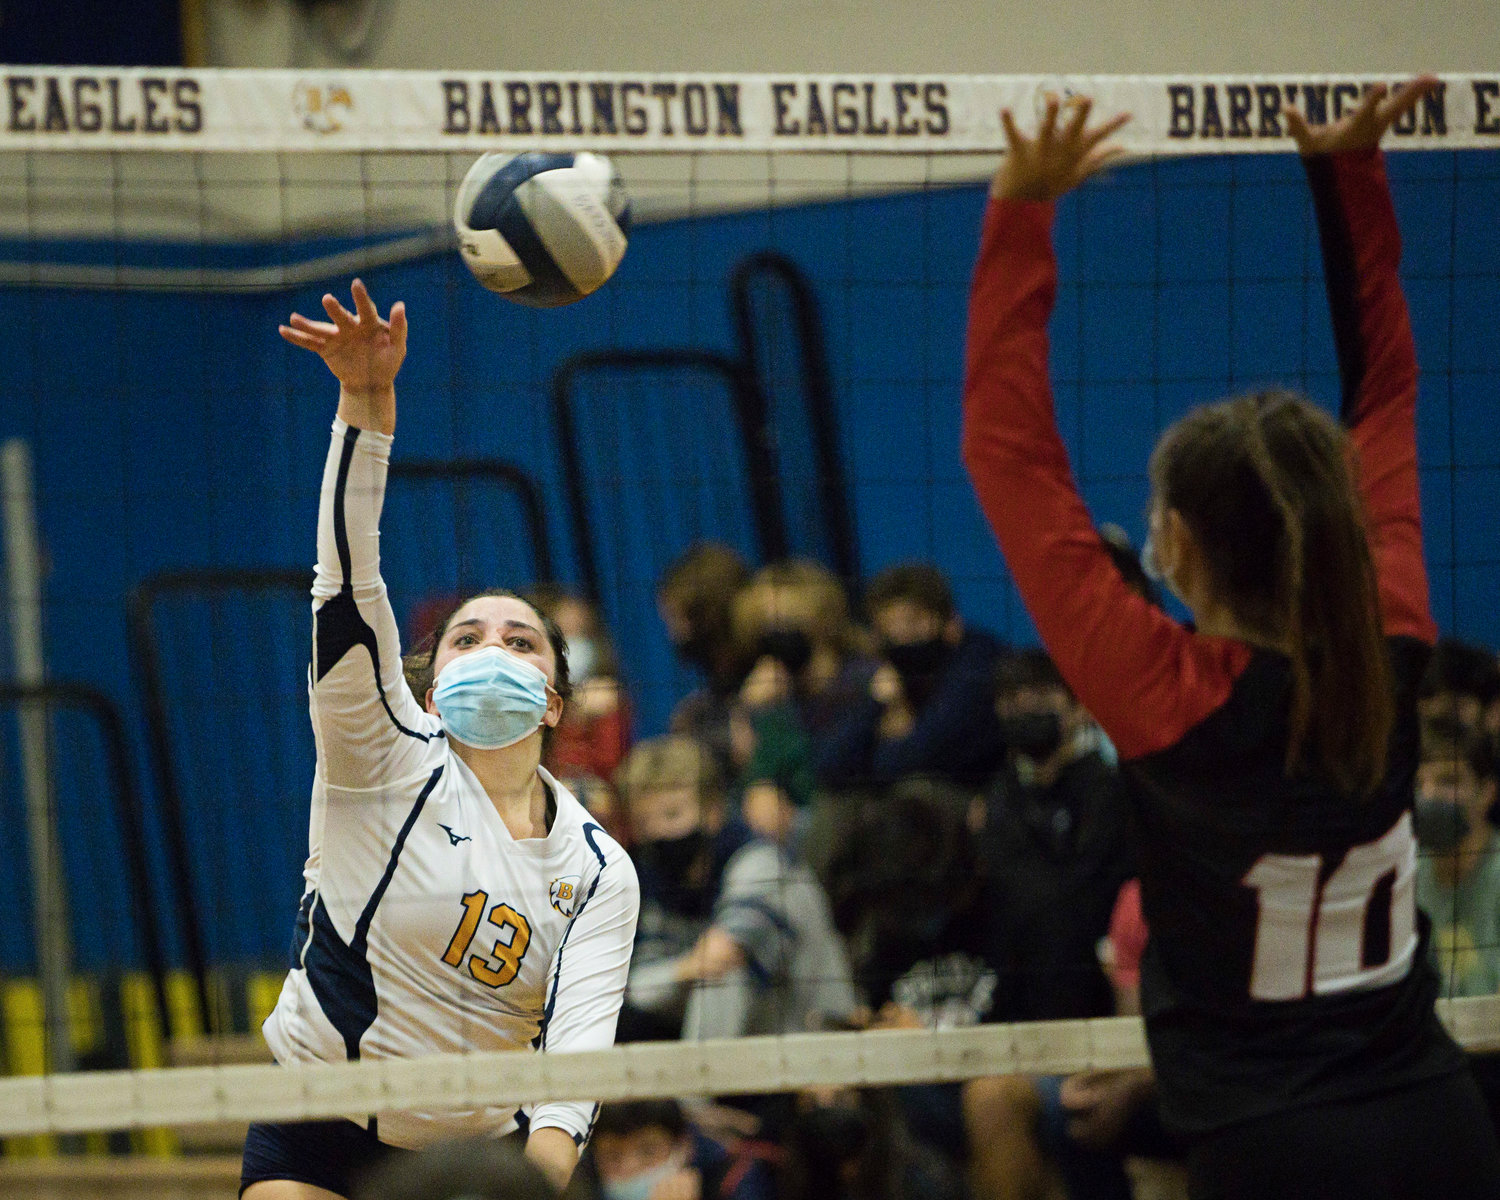 Ally Pfeffer sends the ball back toward the Rogers side of the net.